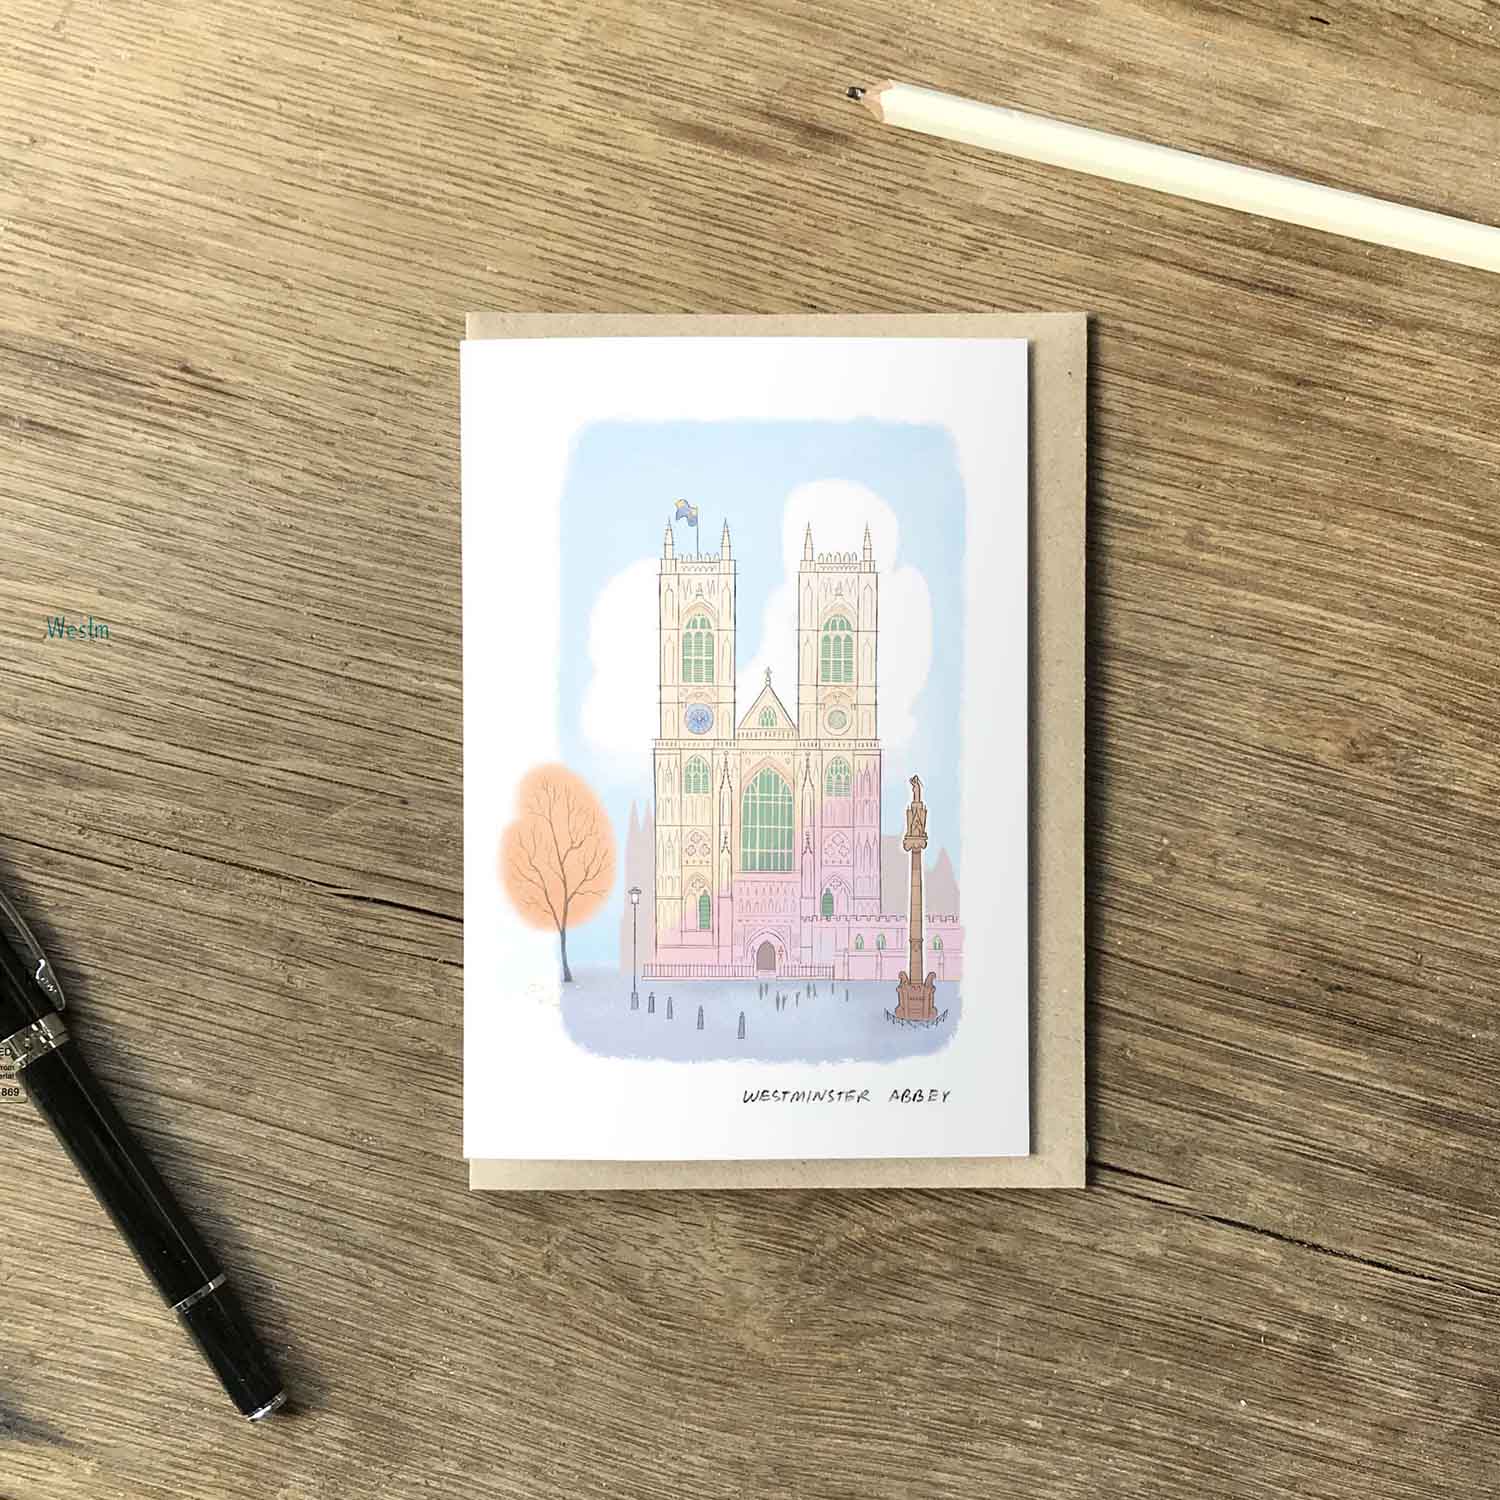 London's Westminster Abbey beautifully illustrated on a greeting card from mike green illustration.